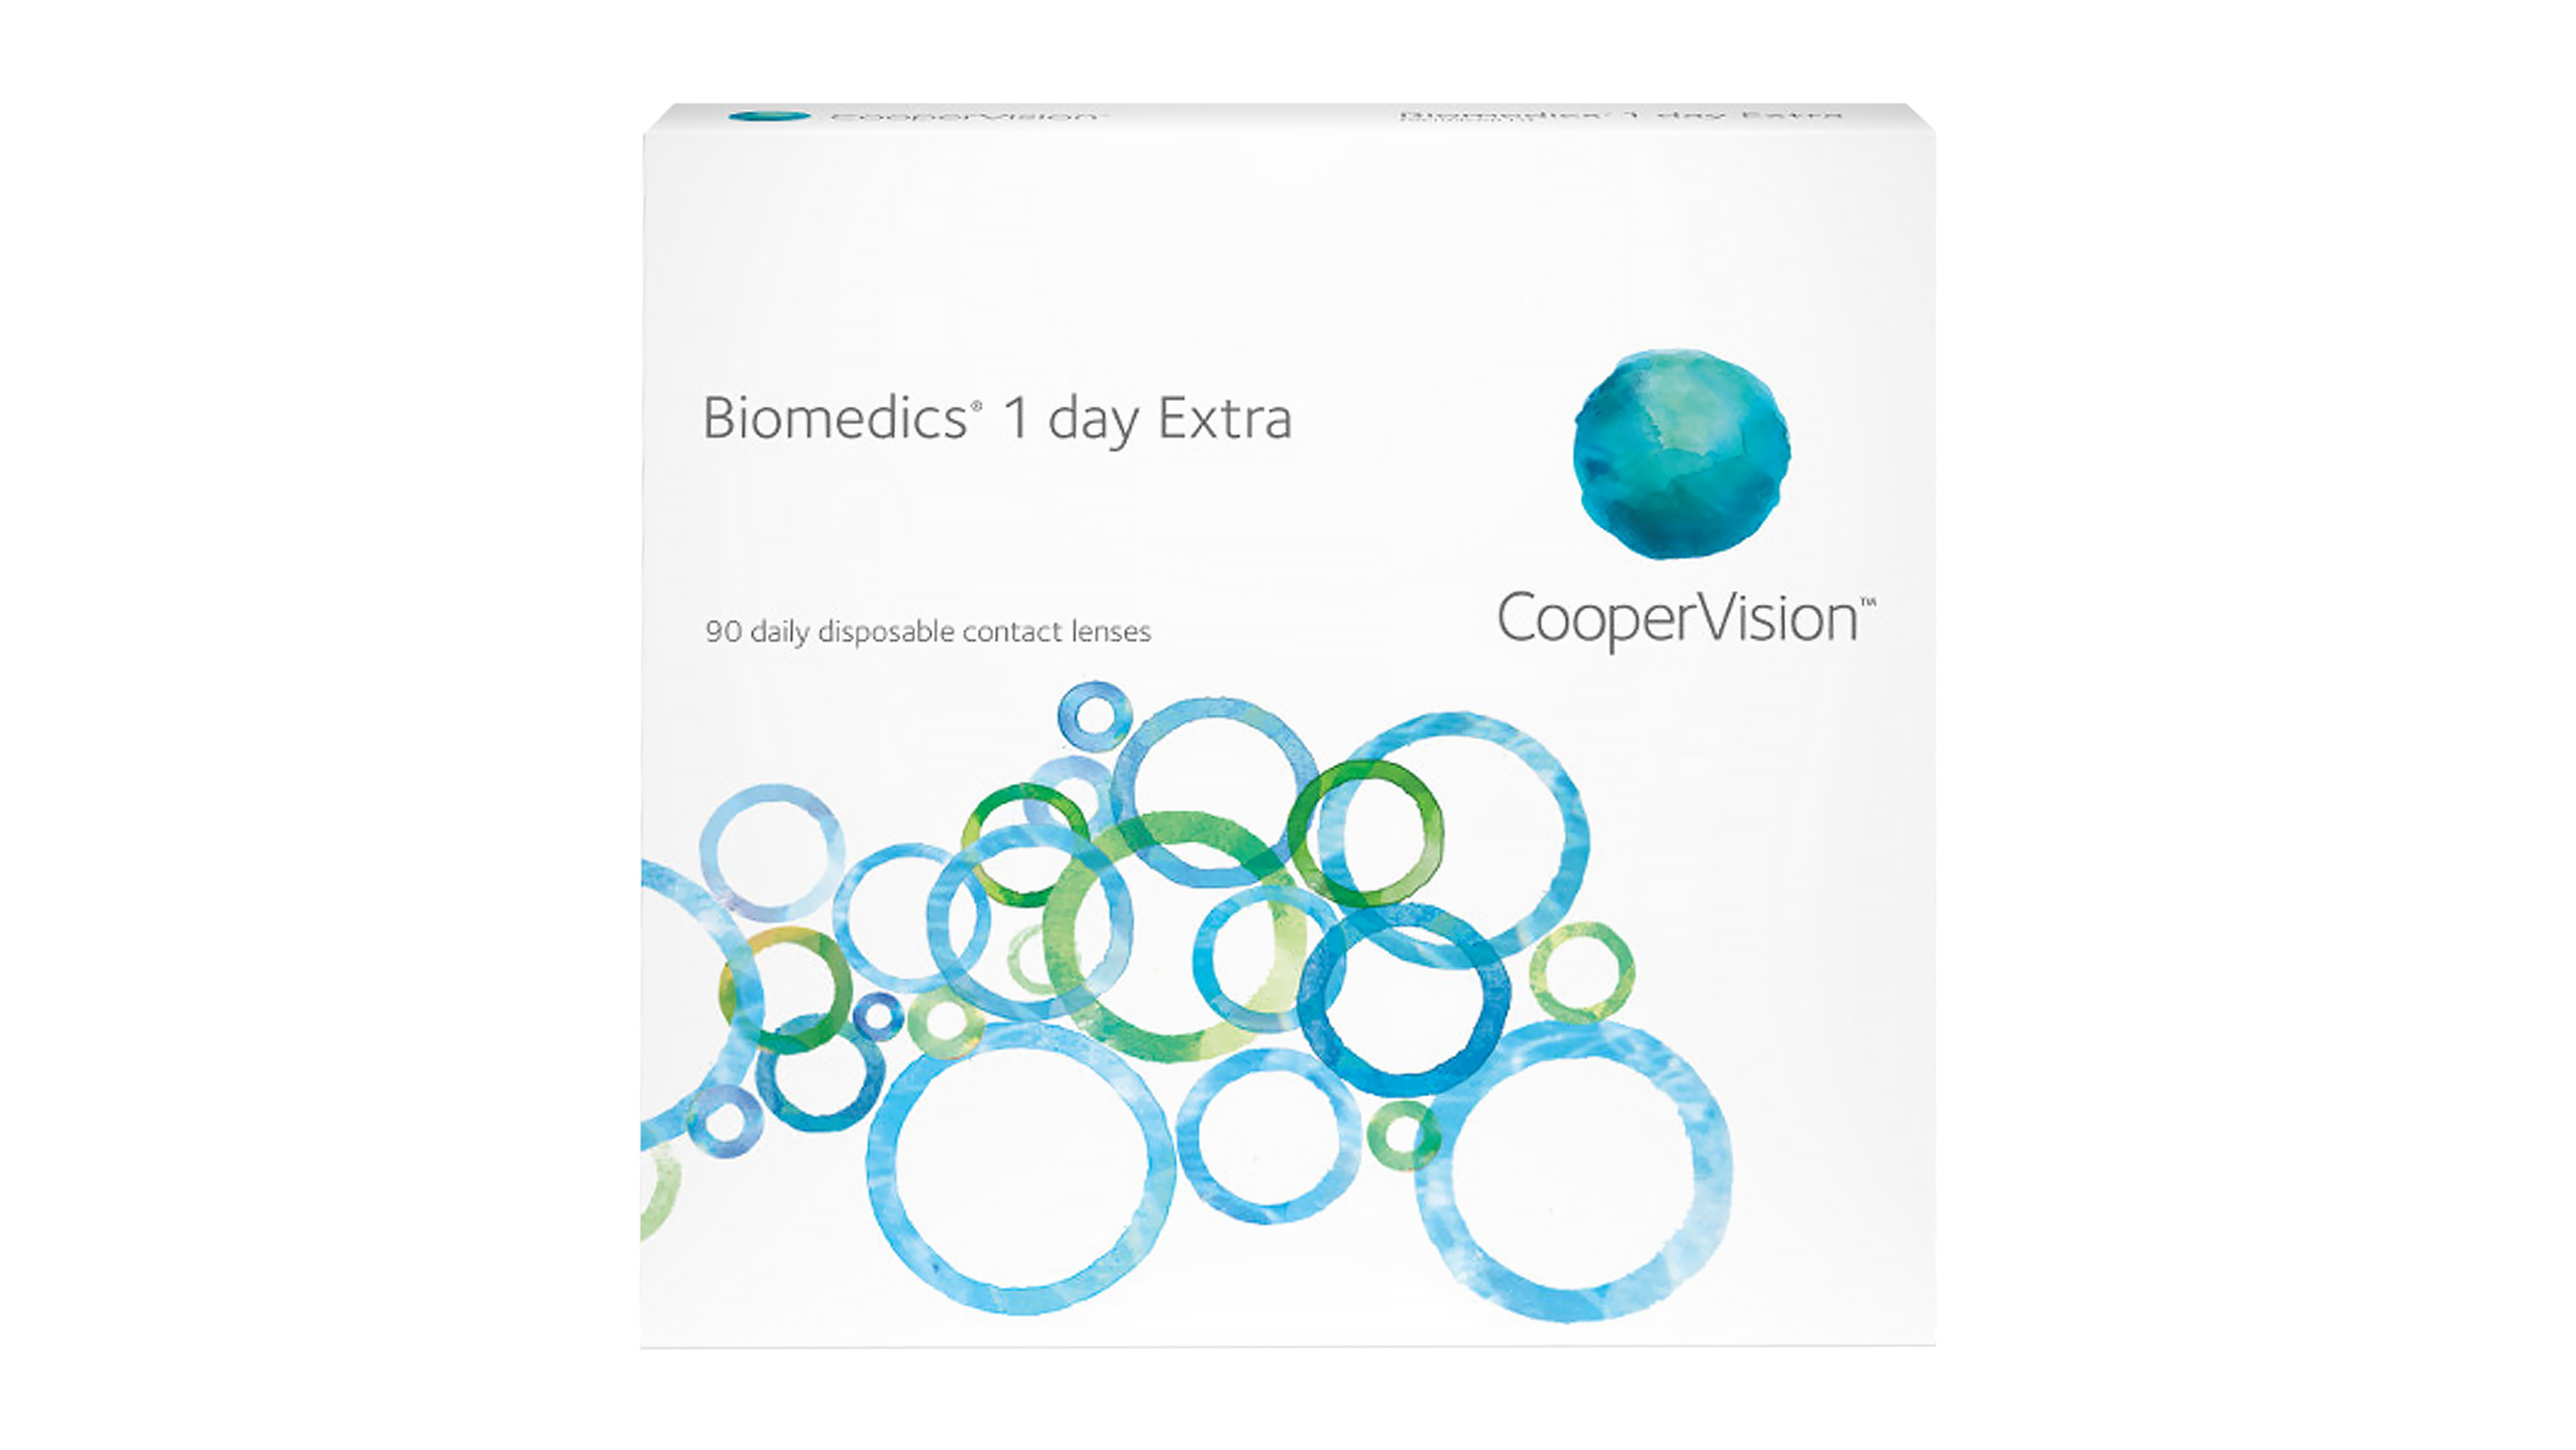 Front Biomedics®  Biomedics® 1 day Extra Tageslinsen Tageslinsen 90 Linsen pro Packung, pro Auge